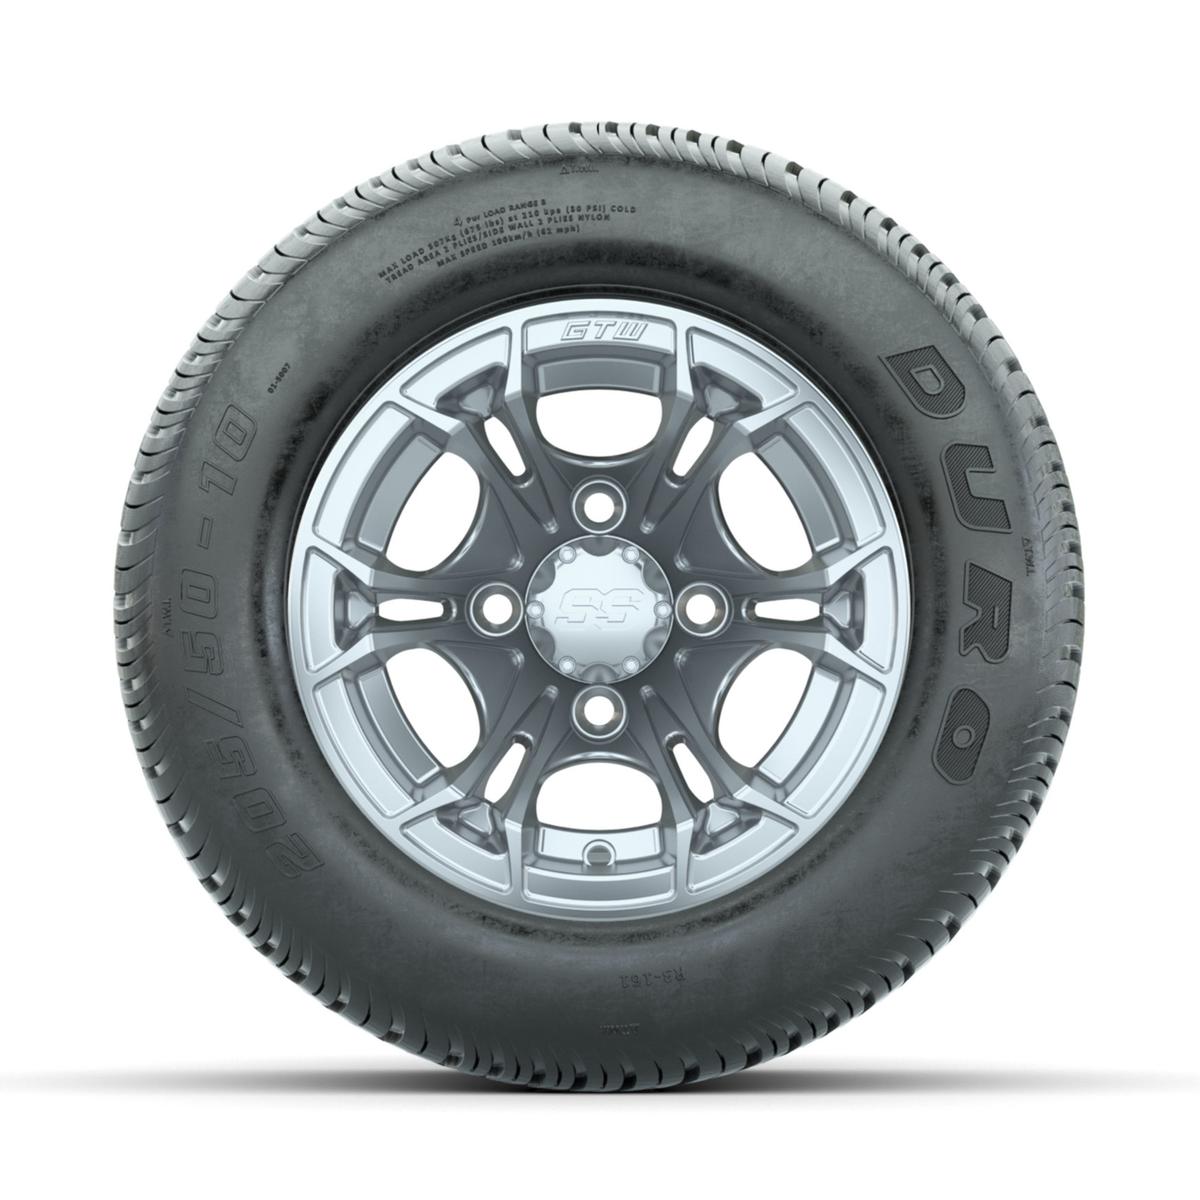 GTW Spyder Silver Brush 10 in Wheels with 205/50-10 Duro Low-profile Tires – Full Set